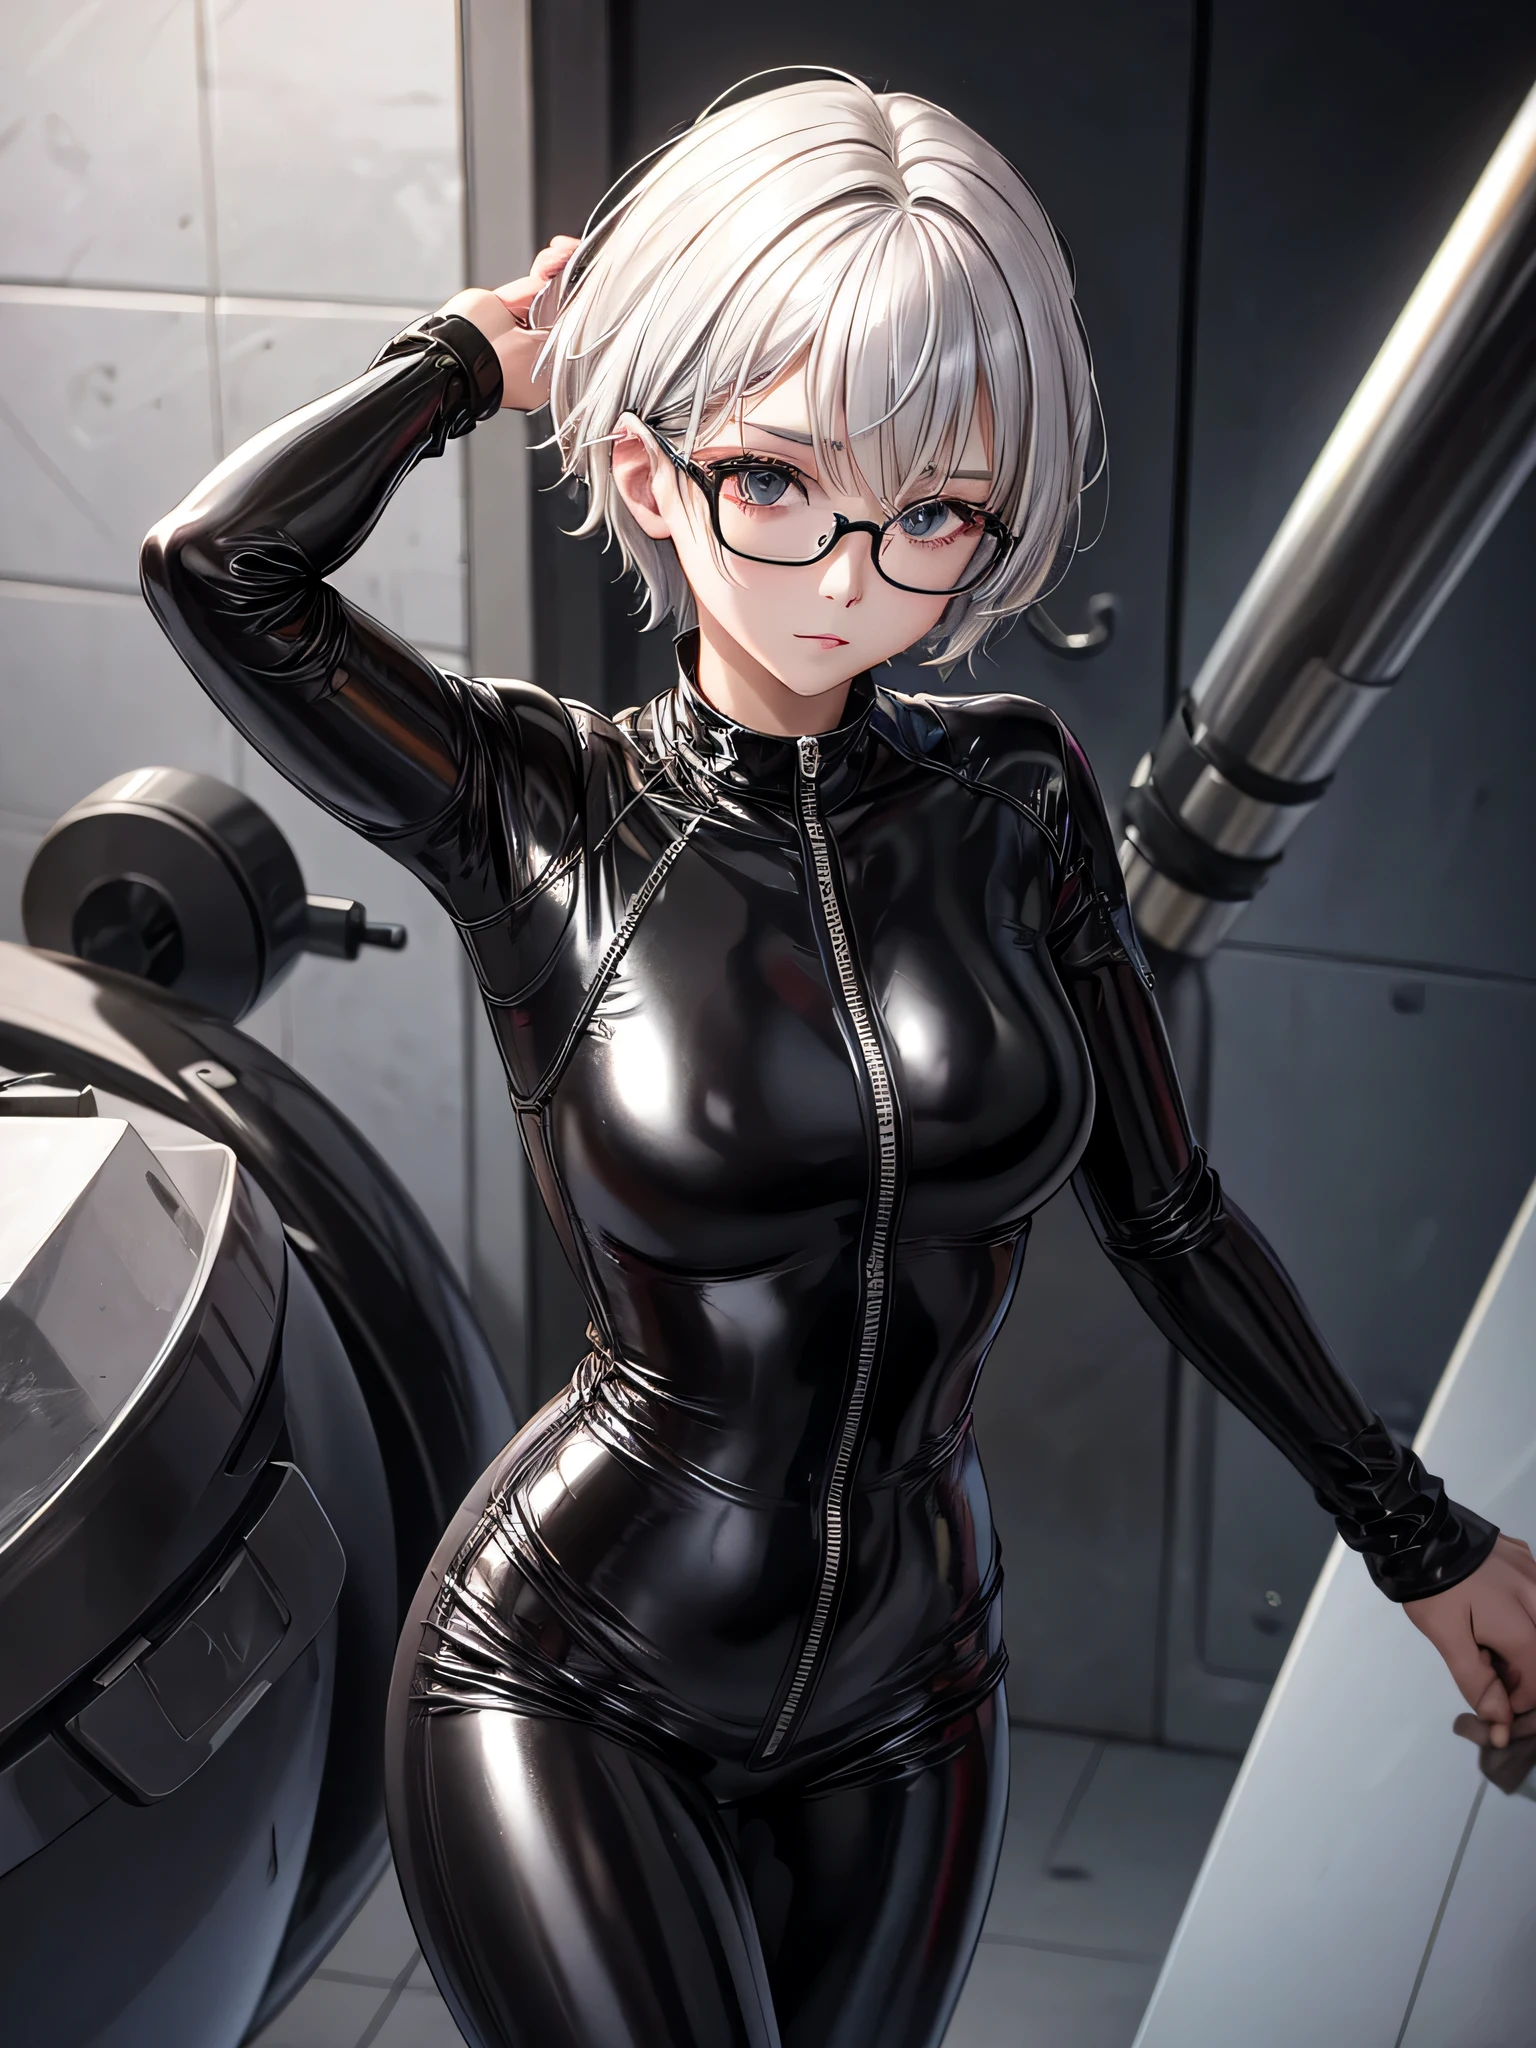 Top quality 8K UHD、Beautiful silver-haired woman with short hair wearing glasses and a black metallic latex sweatsuit、black metallic latex sweatsuit with hidden skin